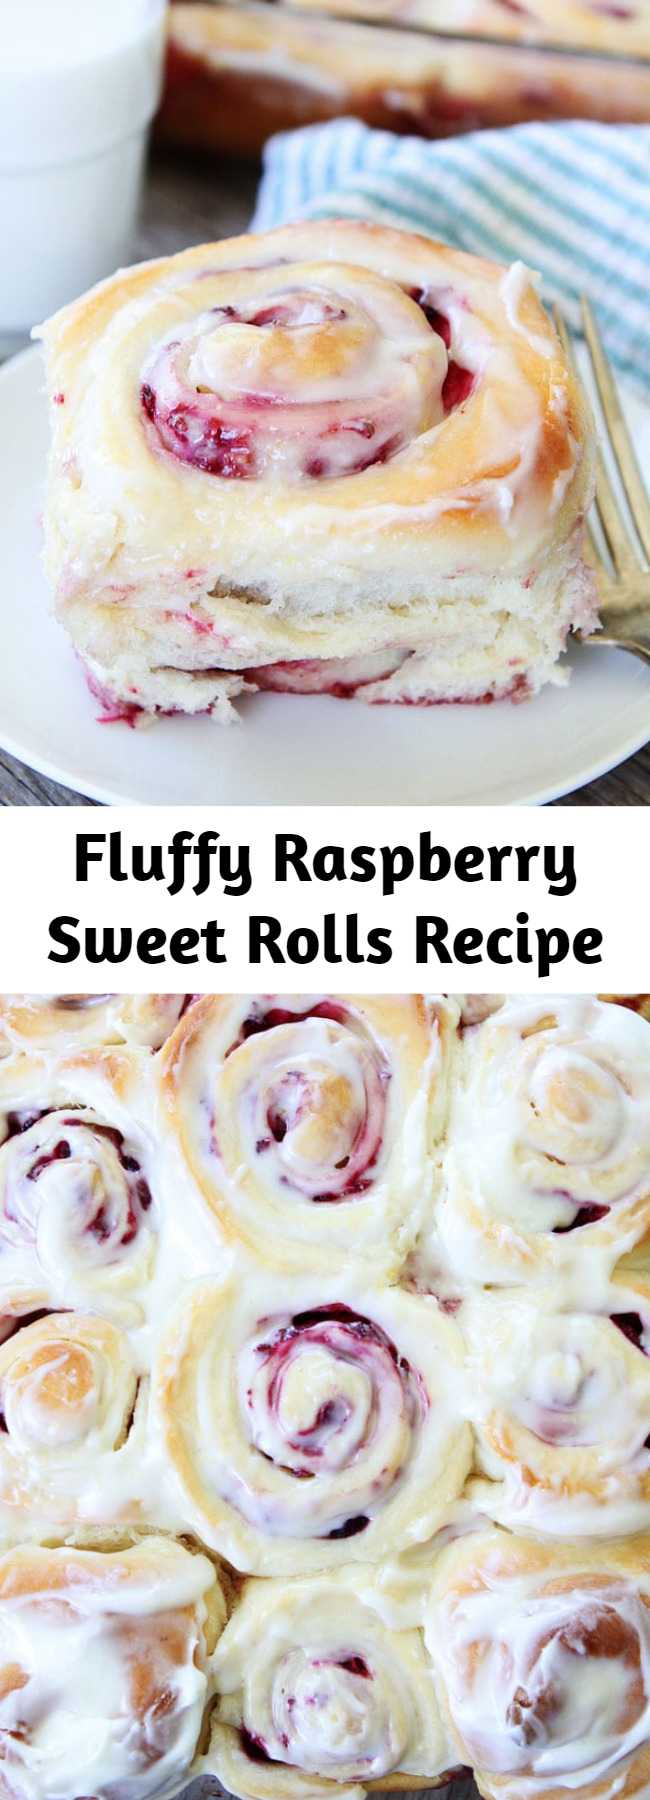 Fluffy Raspberry Sweet Rolls Recipe - Raspberry Sweet Rolls-soft and sweet yeast rolls filled with raspberries and topped with cream cheese frosting. These sweet rolls are perfect for breakfast or brunch!